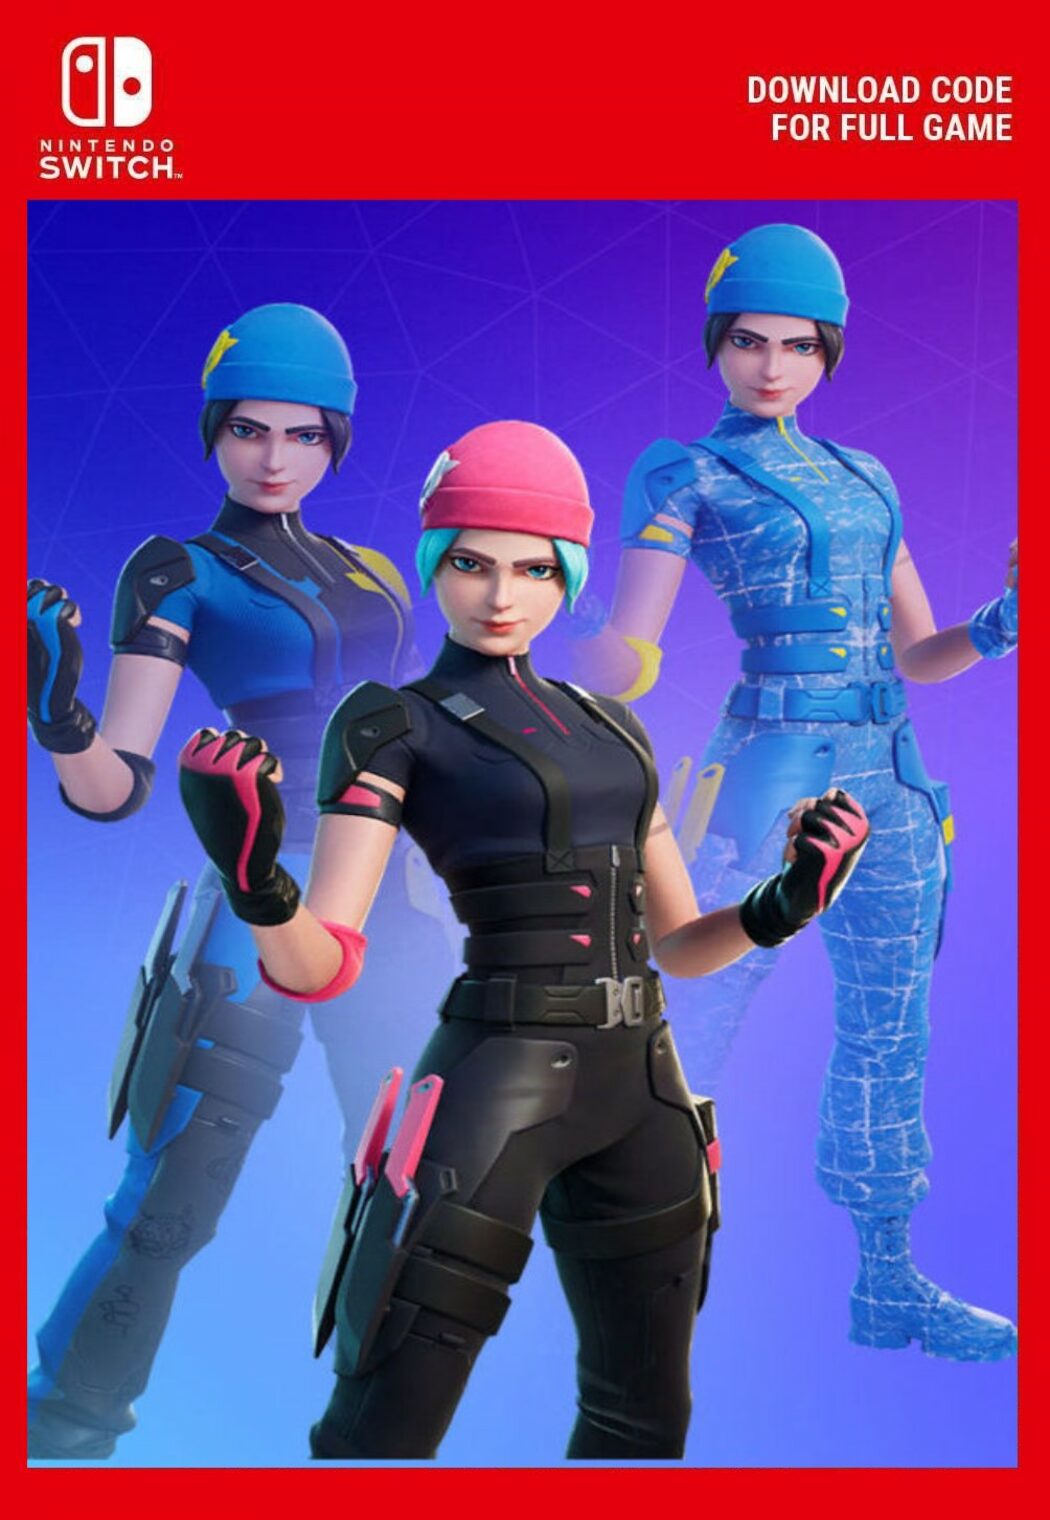 does nintendo switch have fortnite